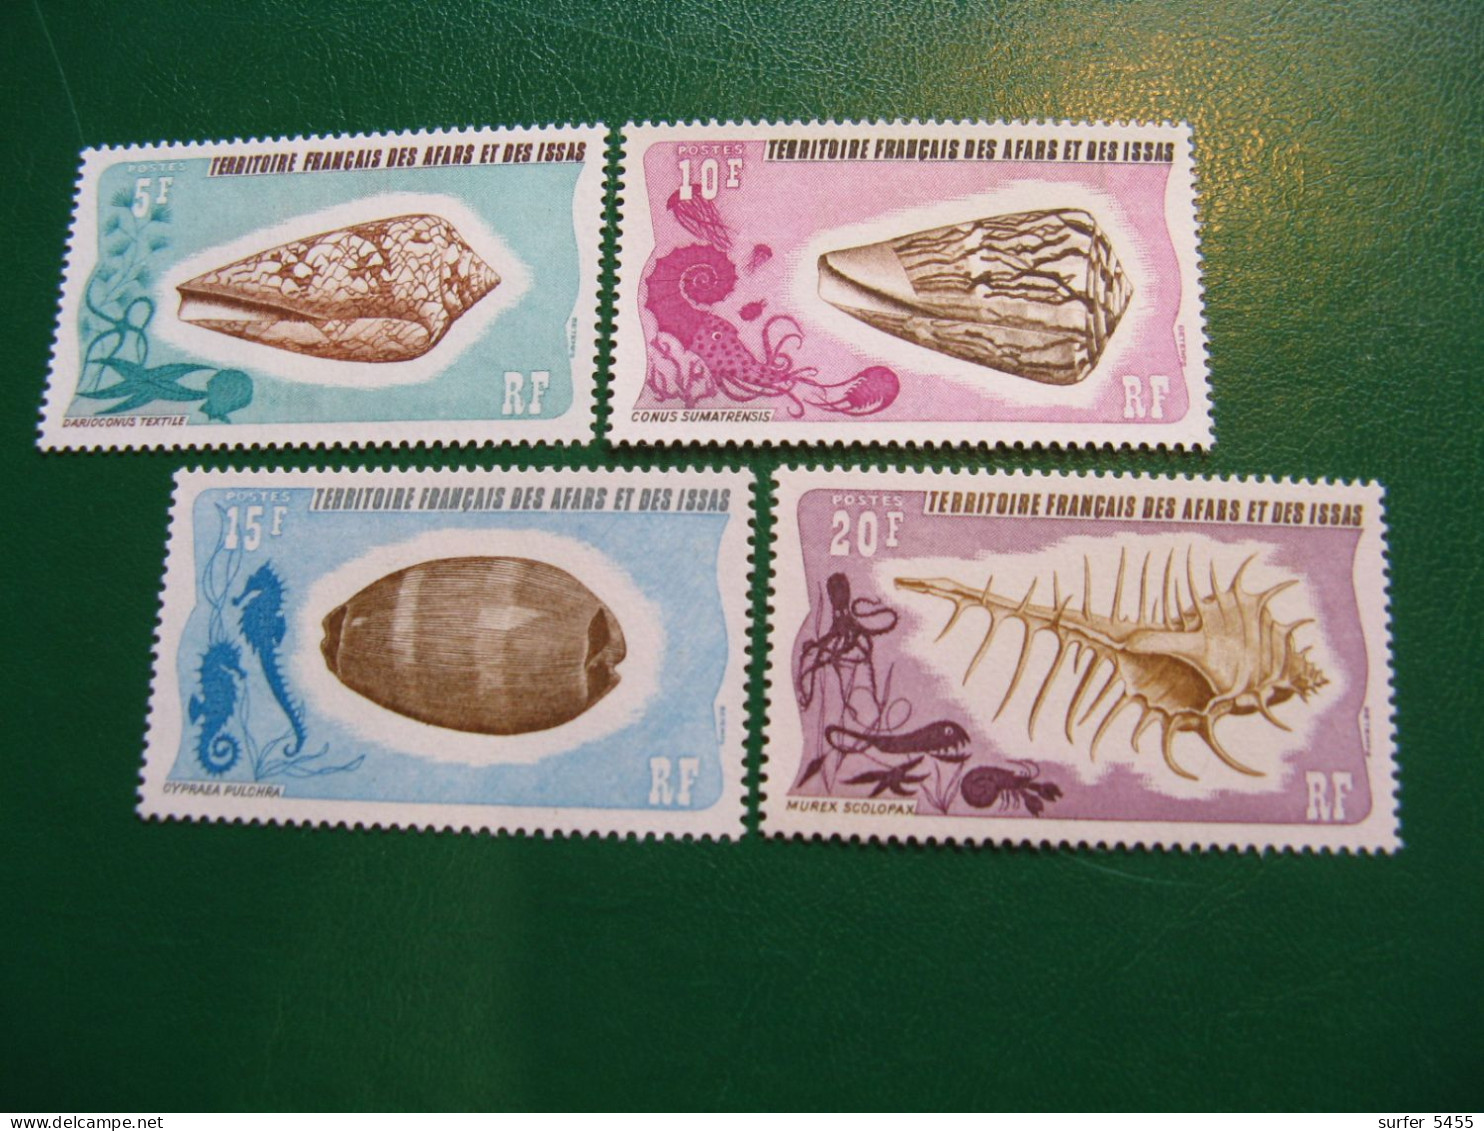 AFARS ET ISSAS - POSTE ORDINAIRE N° 400/403 - TIMBRES NEUFS** LUXE -  MNH -  COTE 21,00 EUROS - Unused Stamps